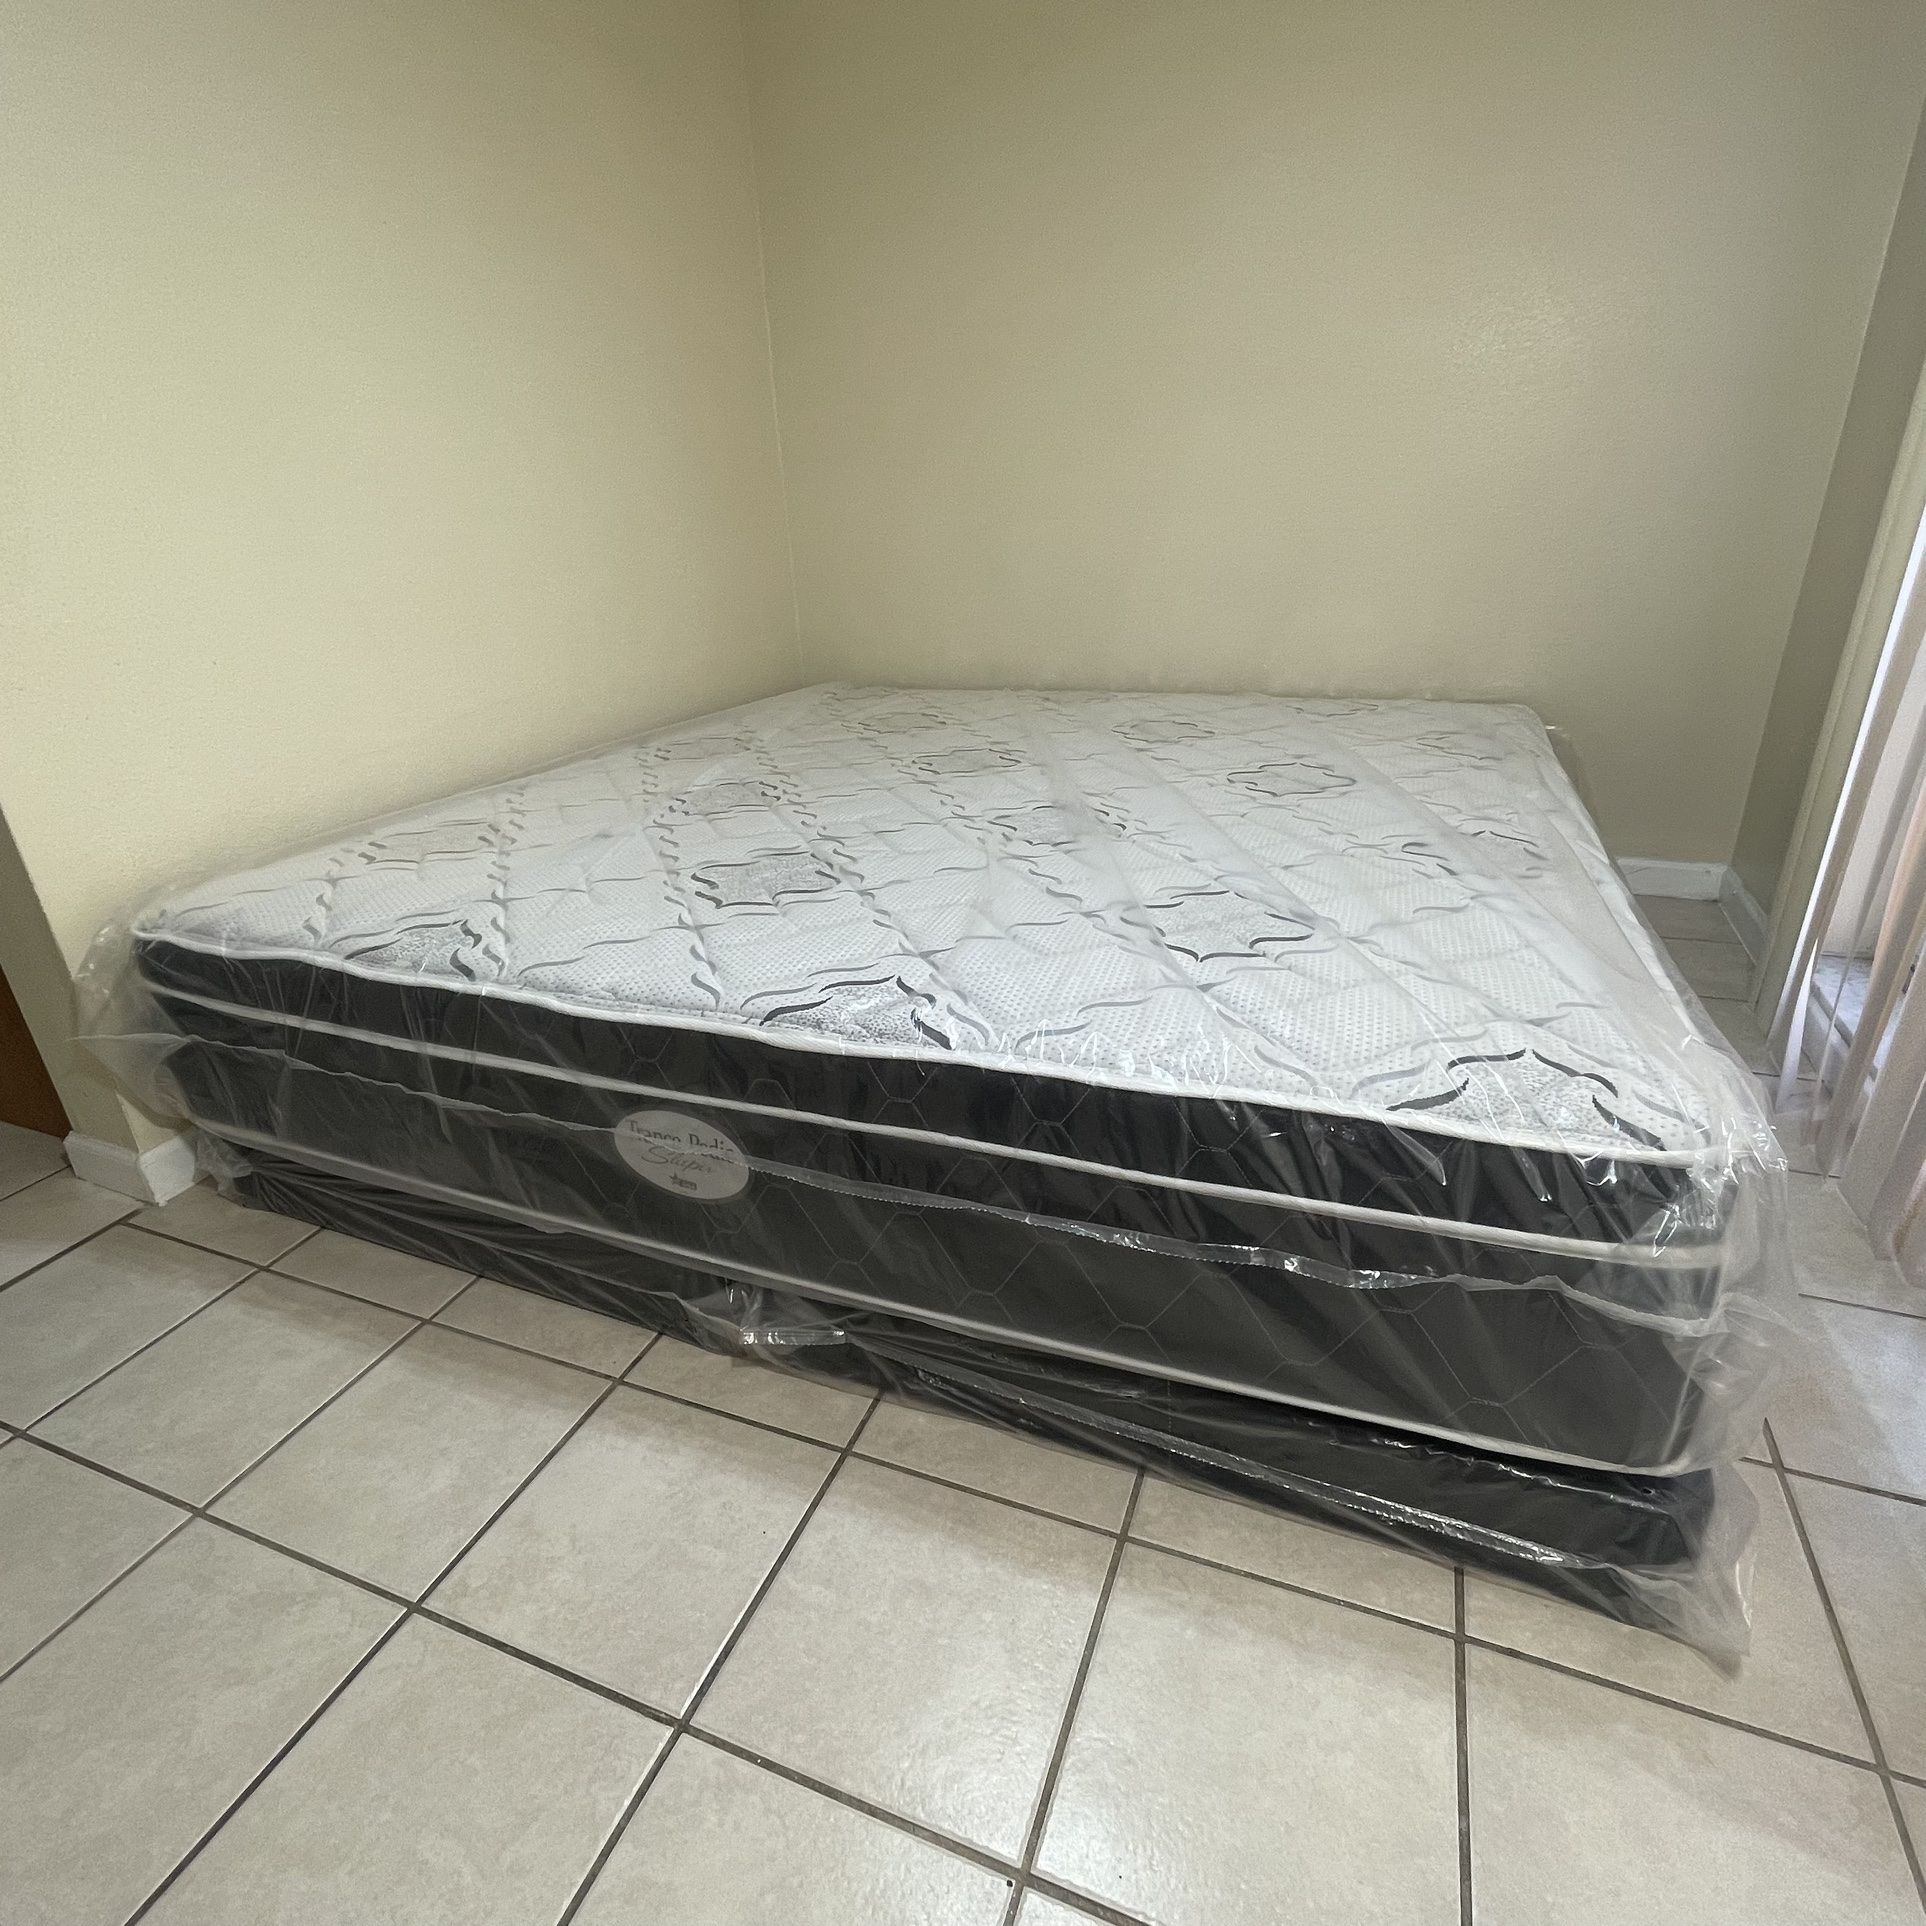 New King 12 Inch Pillowtop Mattress And boxspring Set! FREE SAME DAY DELIVERY 